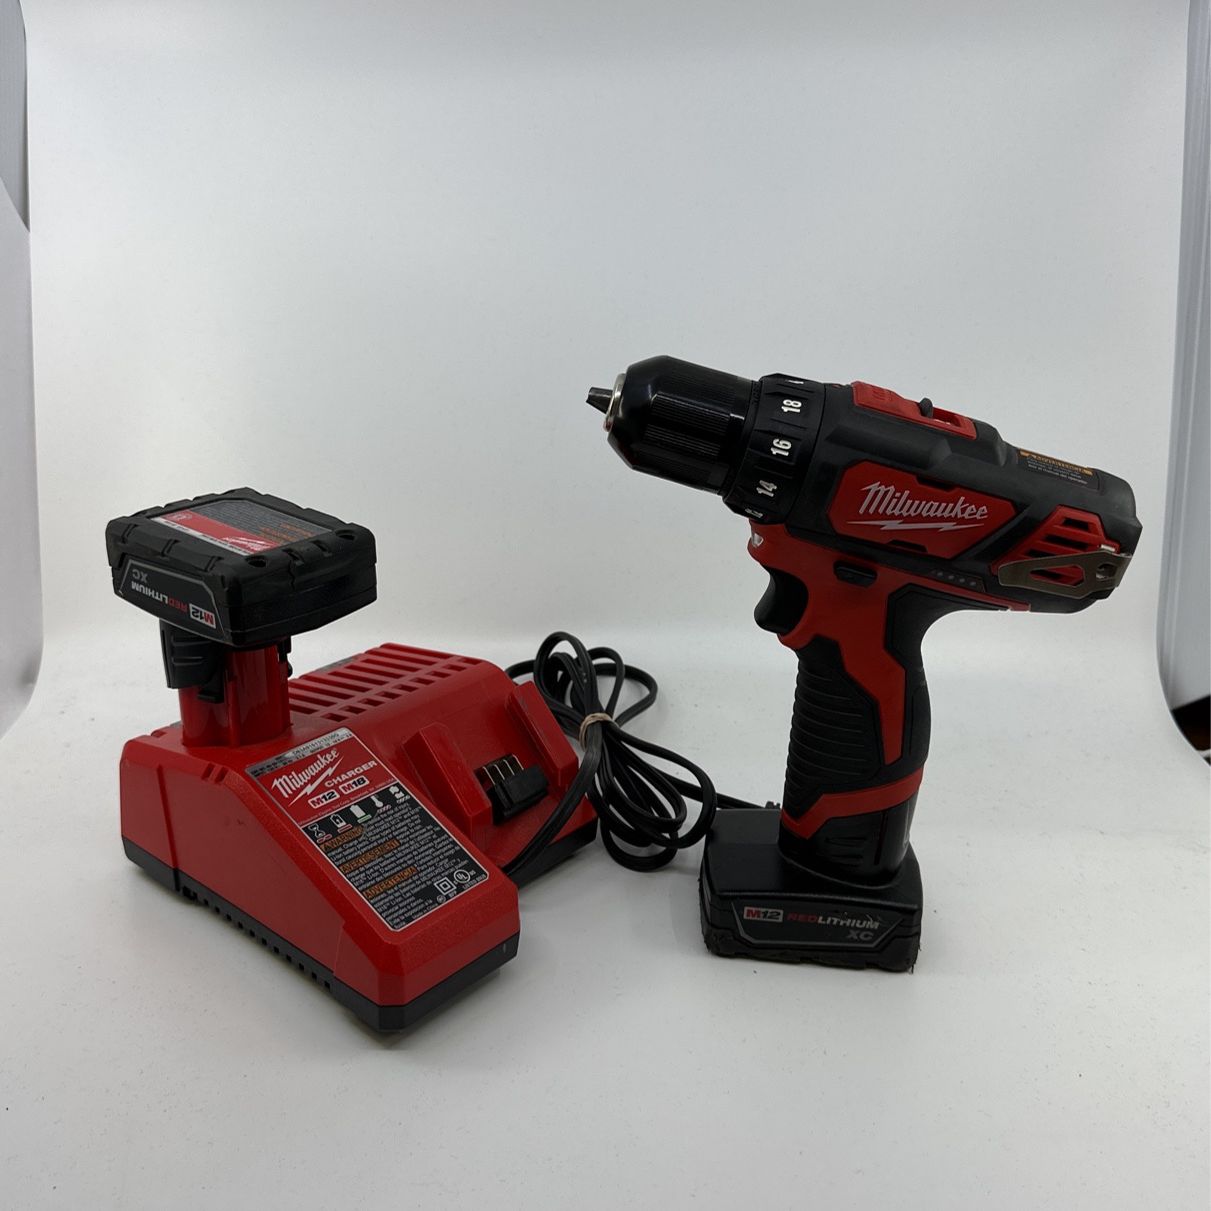 Milwaukee 2407-20 Drill/Driver 3/8 2 Batteries And charger